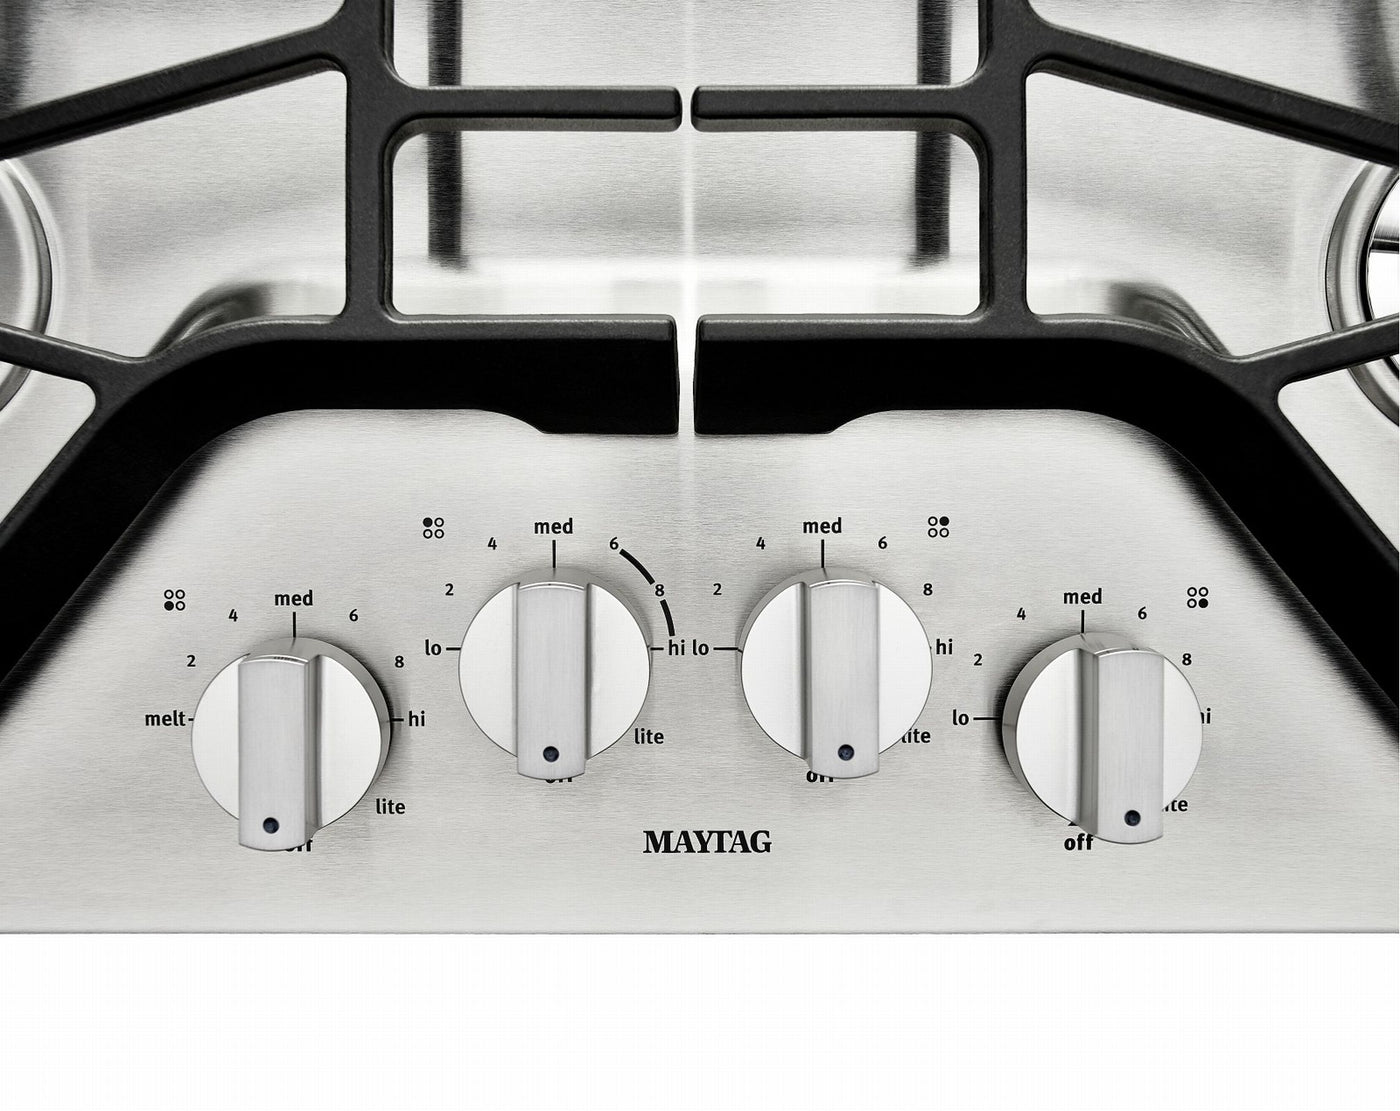 Maytag Stainless Steel 30" Gas Cooktop - MGC7430DS